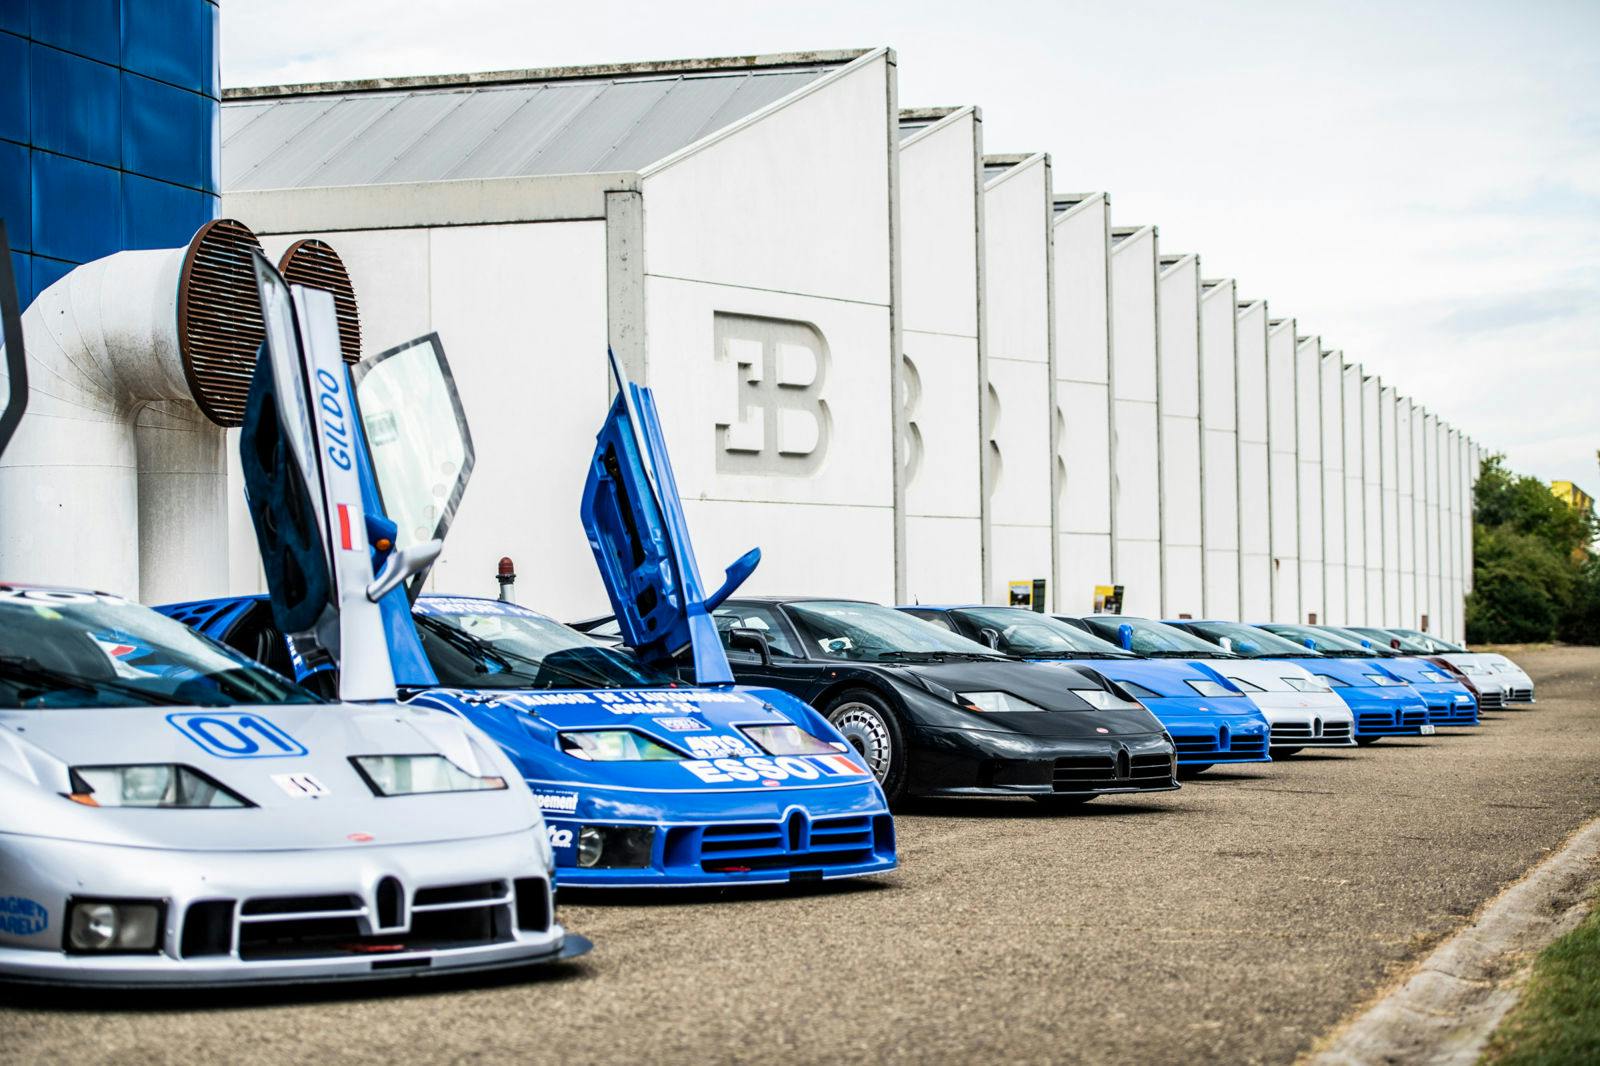 Celebrating 30 years of the EB110 at the ‘Fabbrica Blu’ in Campogalliano.
